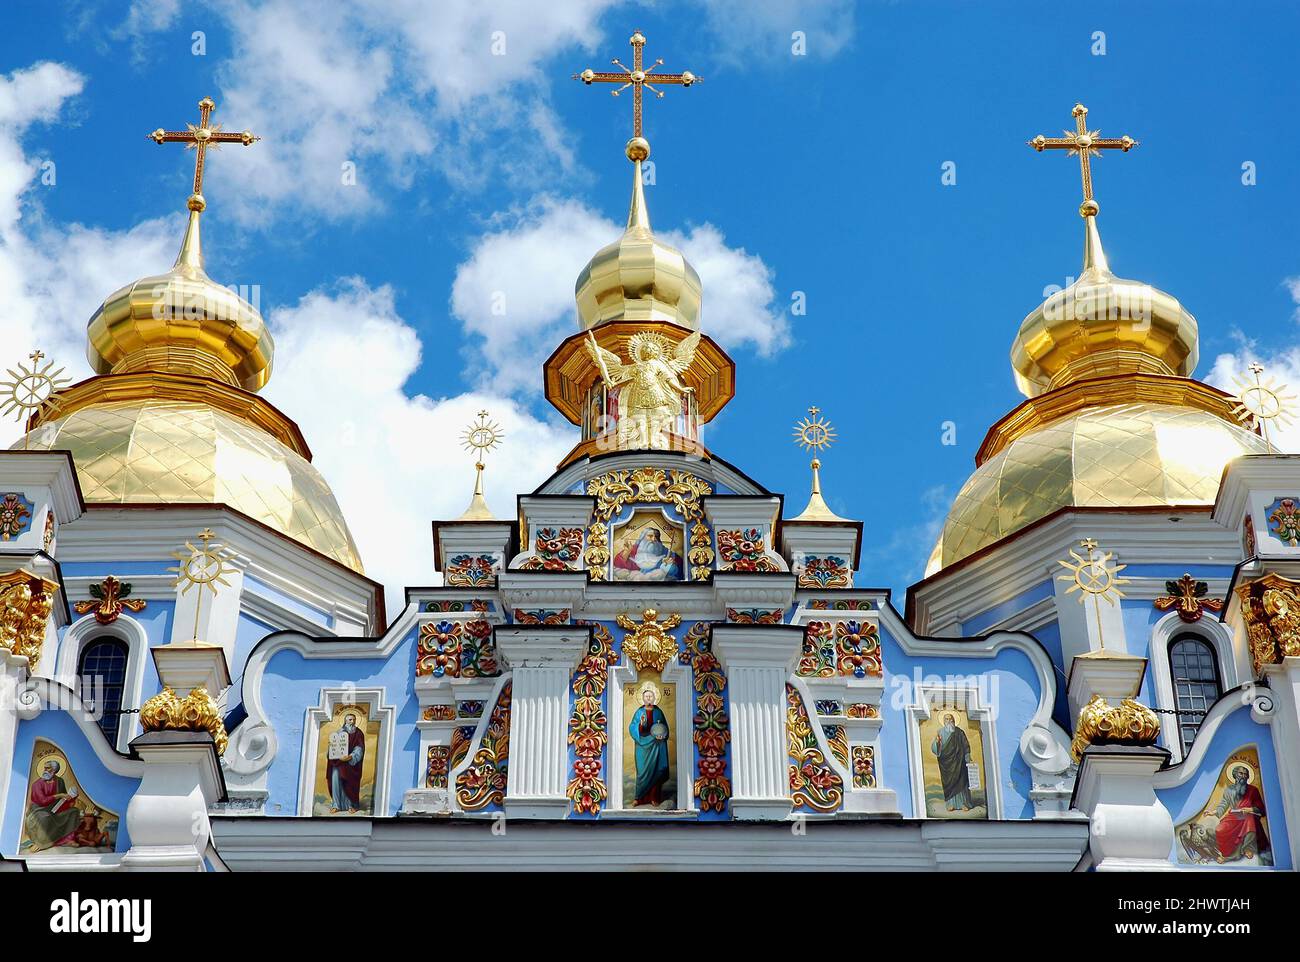 Kyiv or Kiev, Ukraine: Detail of the artwork on St Michael's Golden-Domed Cathedral within the complex of St Michael's Golden-Domed Monastery. Stock Photo